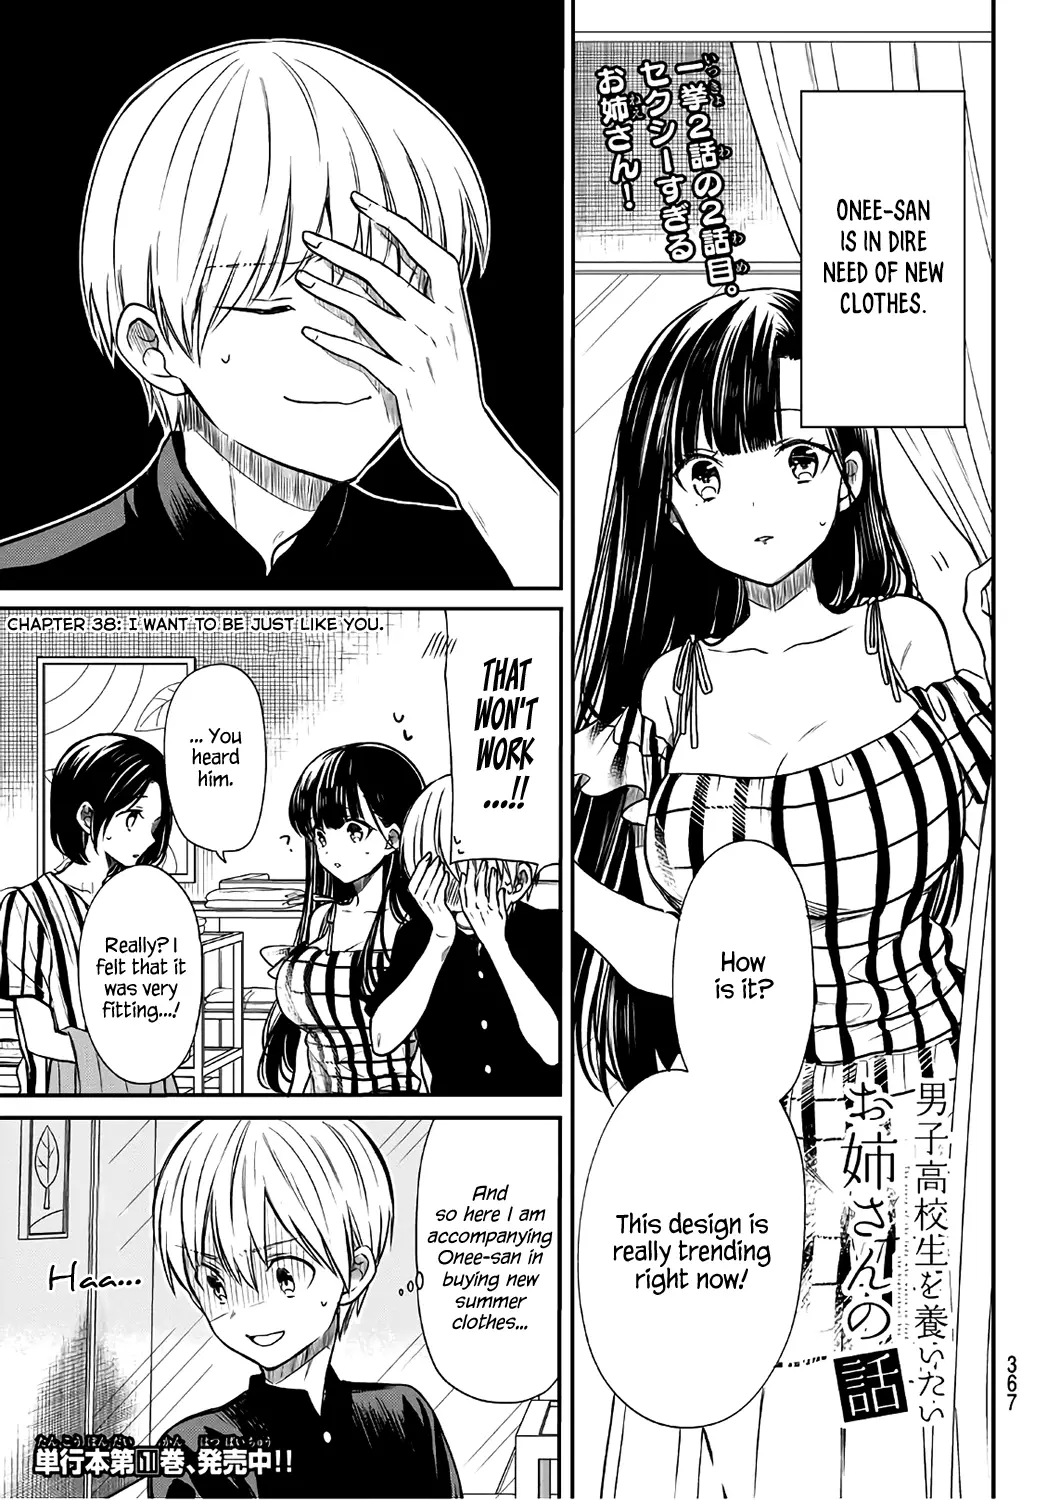 The Story Of An Onee-San Who Wants To Keep A High School Boy - 38 page 2